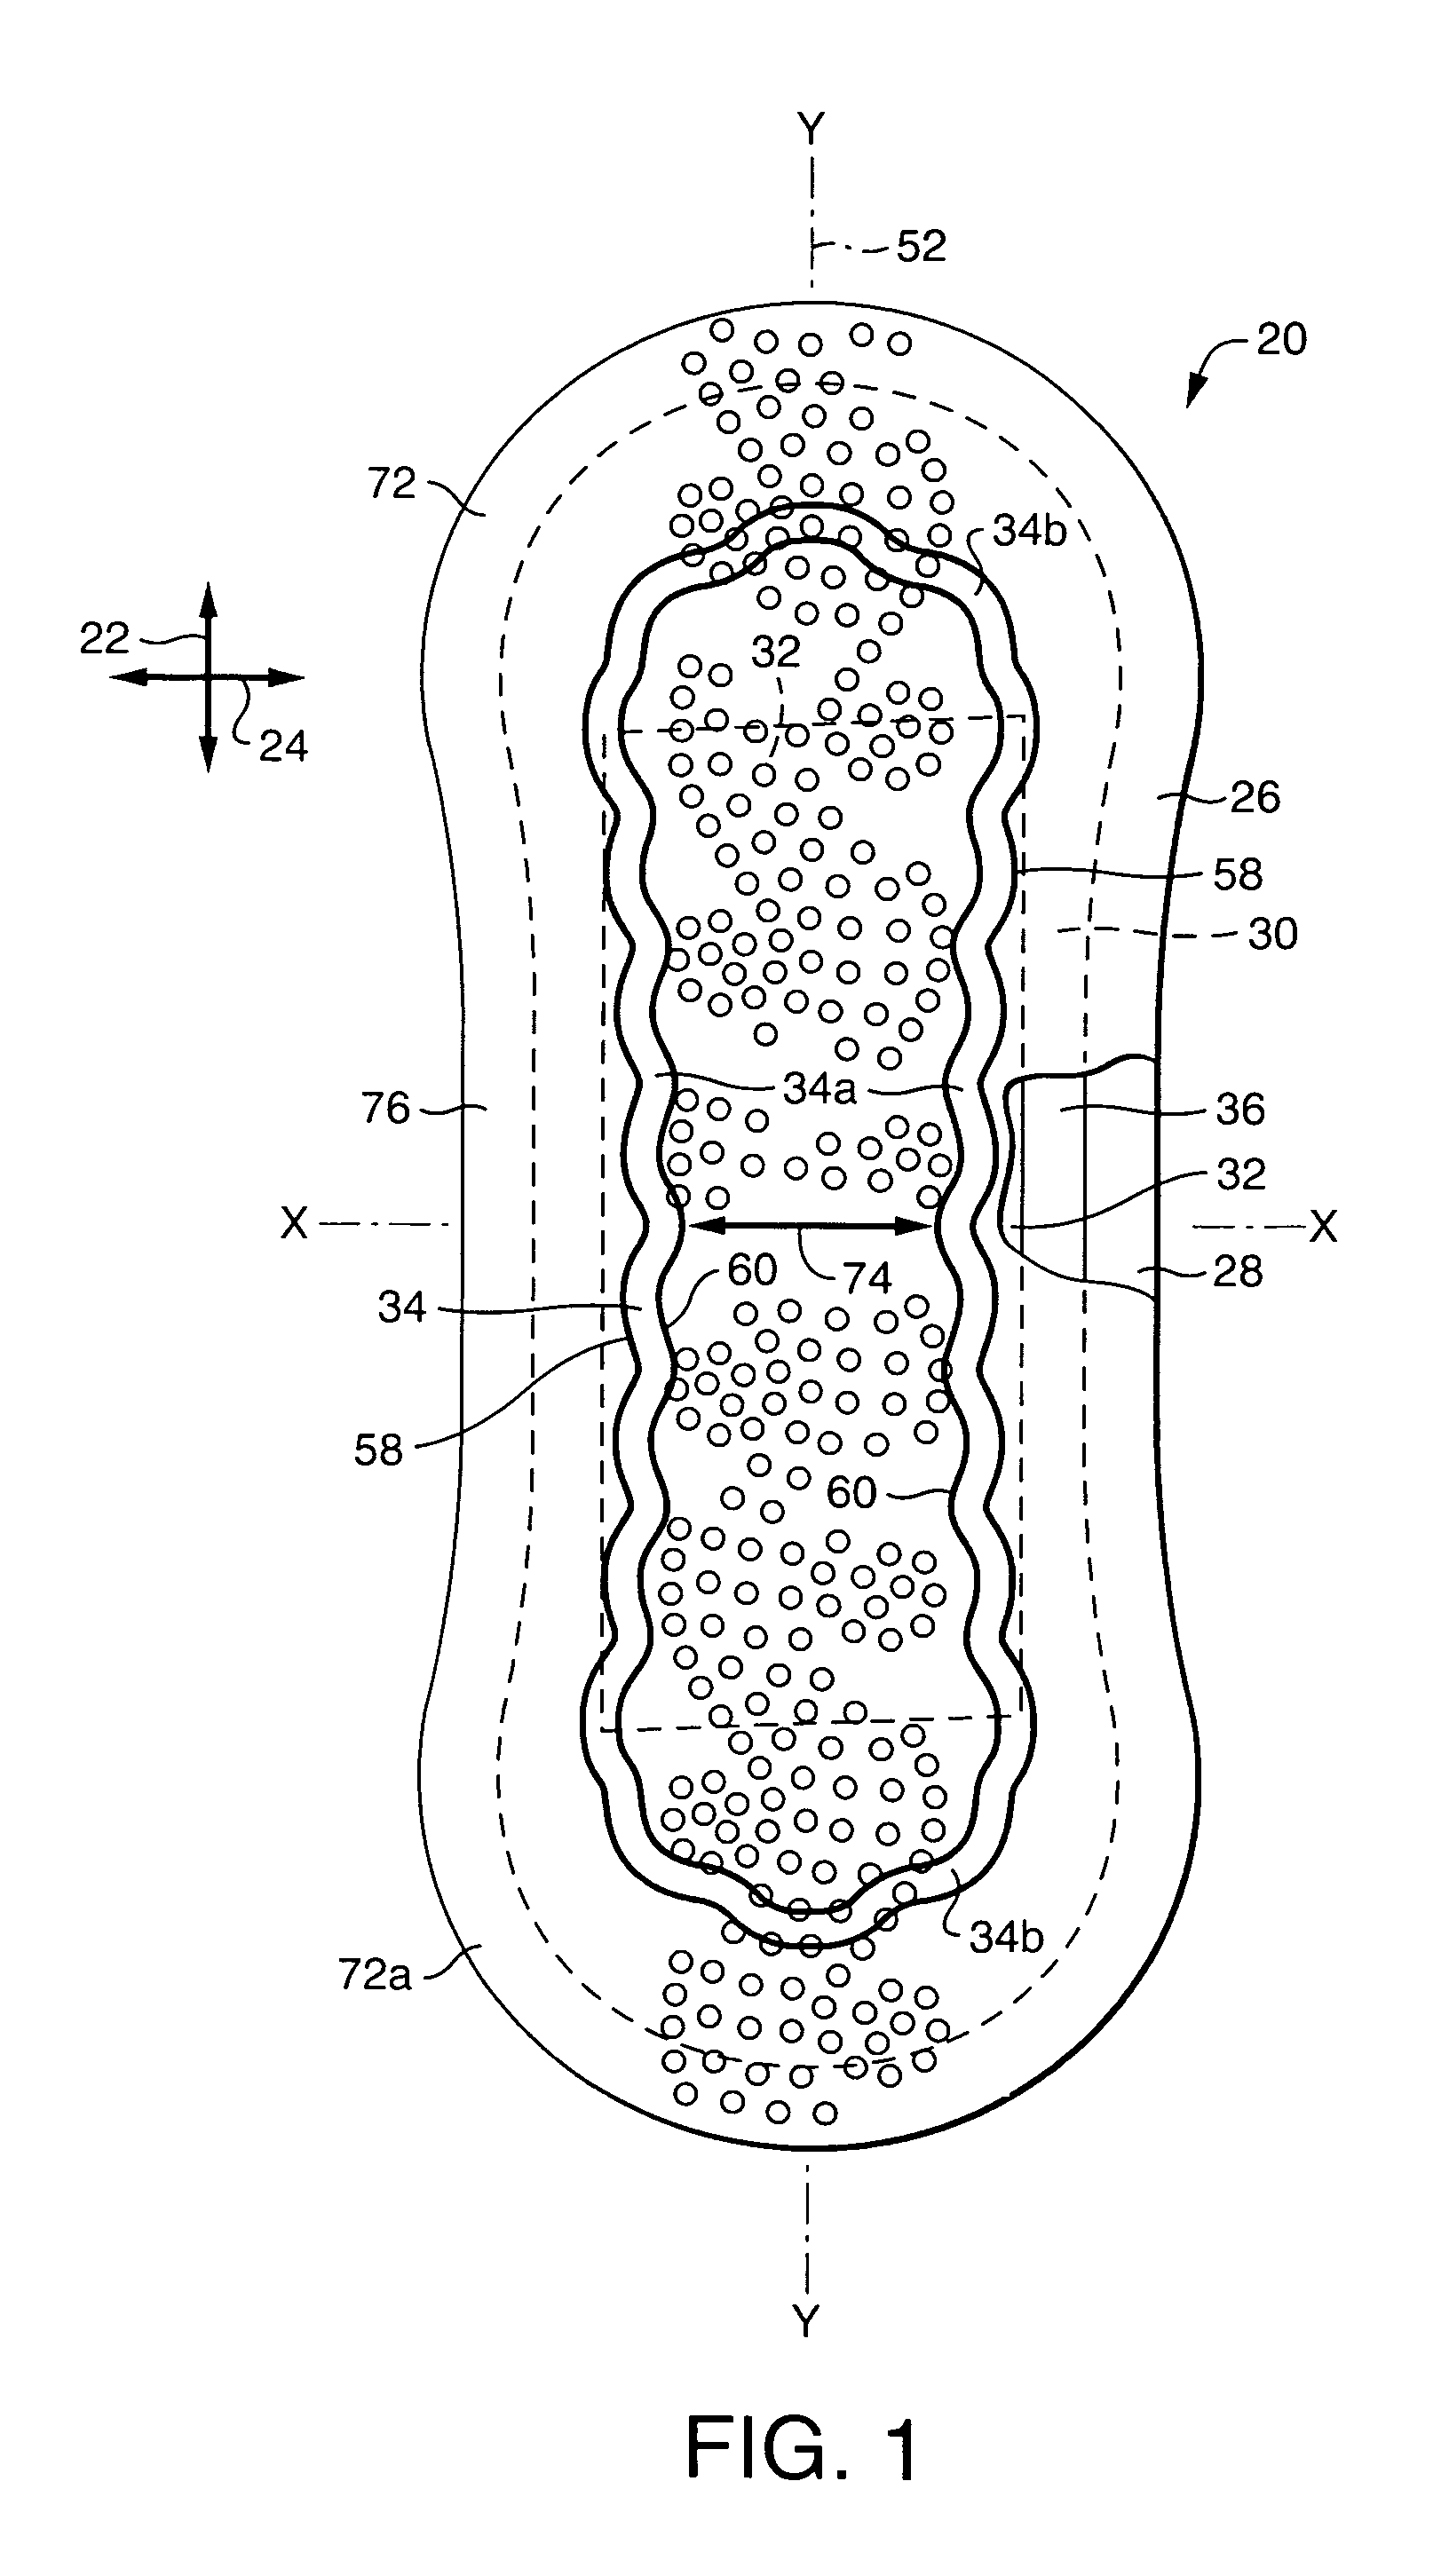 Nonlinear, undulating perimeter embossing in an absorbent article